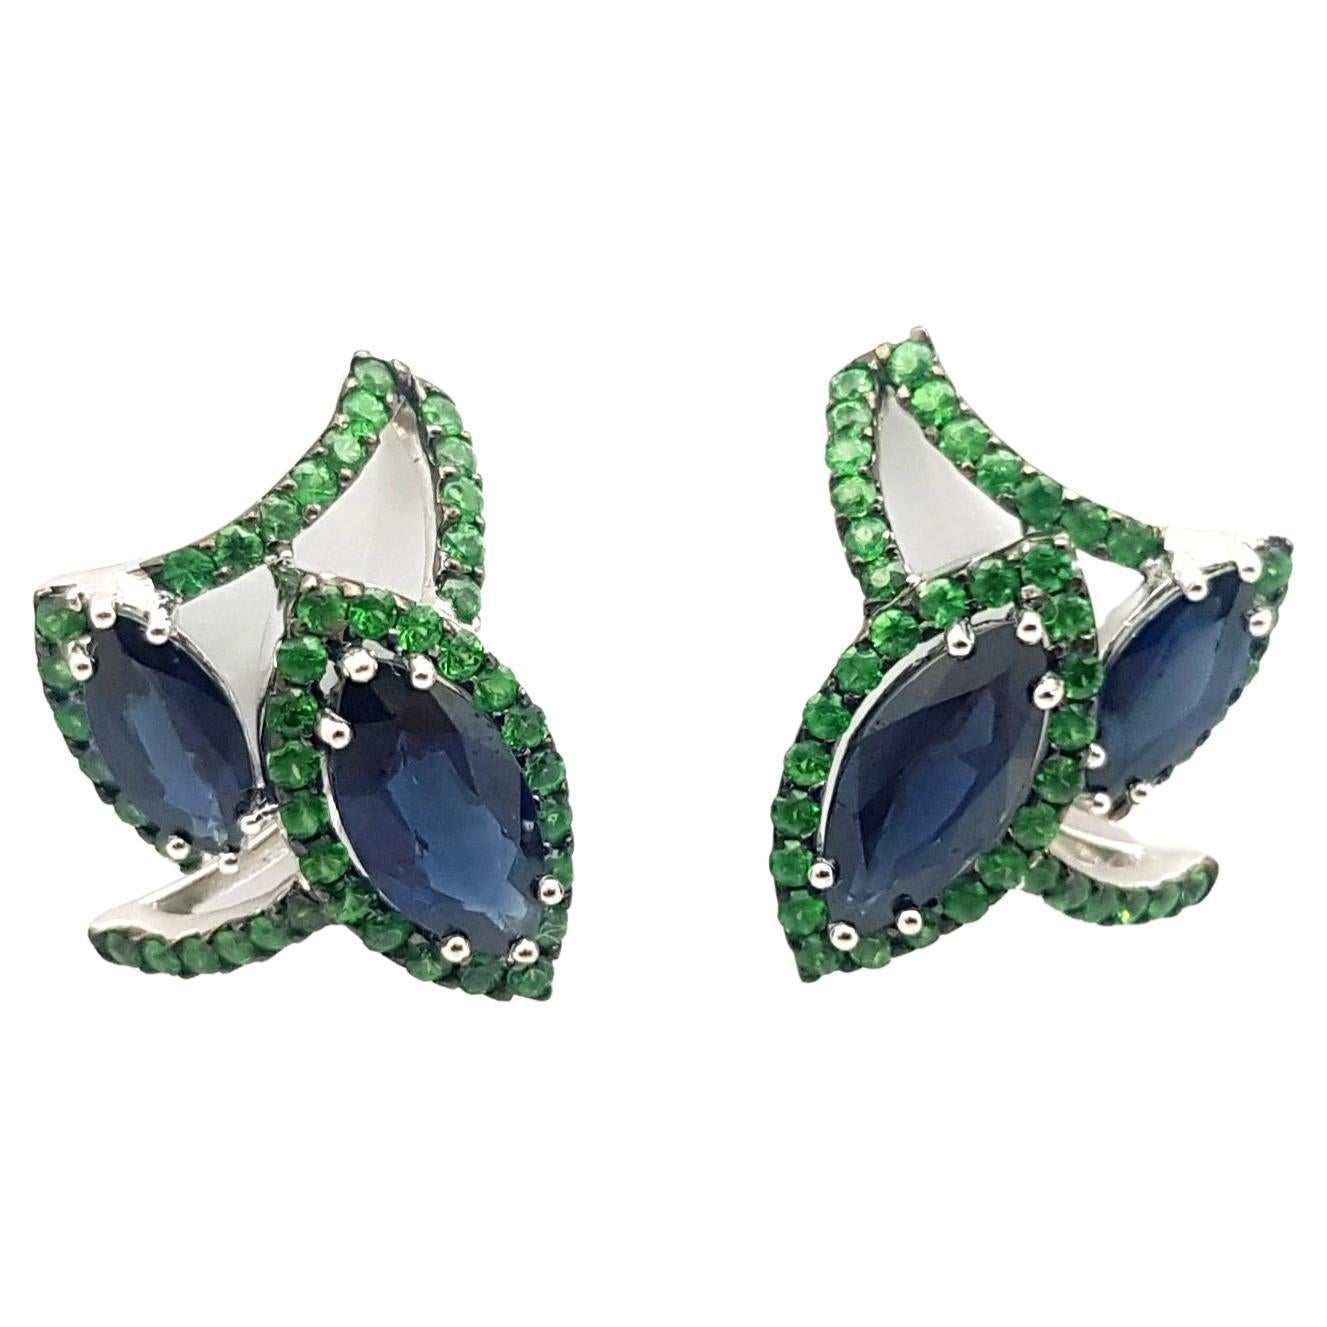 Blue Sapphire 4.96 carats with Tsavorite 1.47 carats Earrings set in 18K White Gold Settings

Width: 2.0 cm 
Length: 2.0  cm
Total Weight: 8.4 grams

